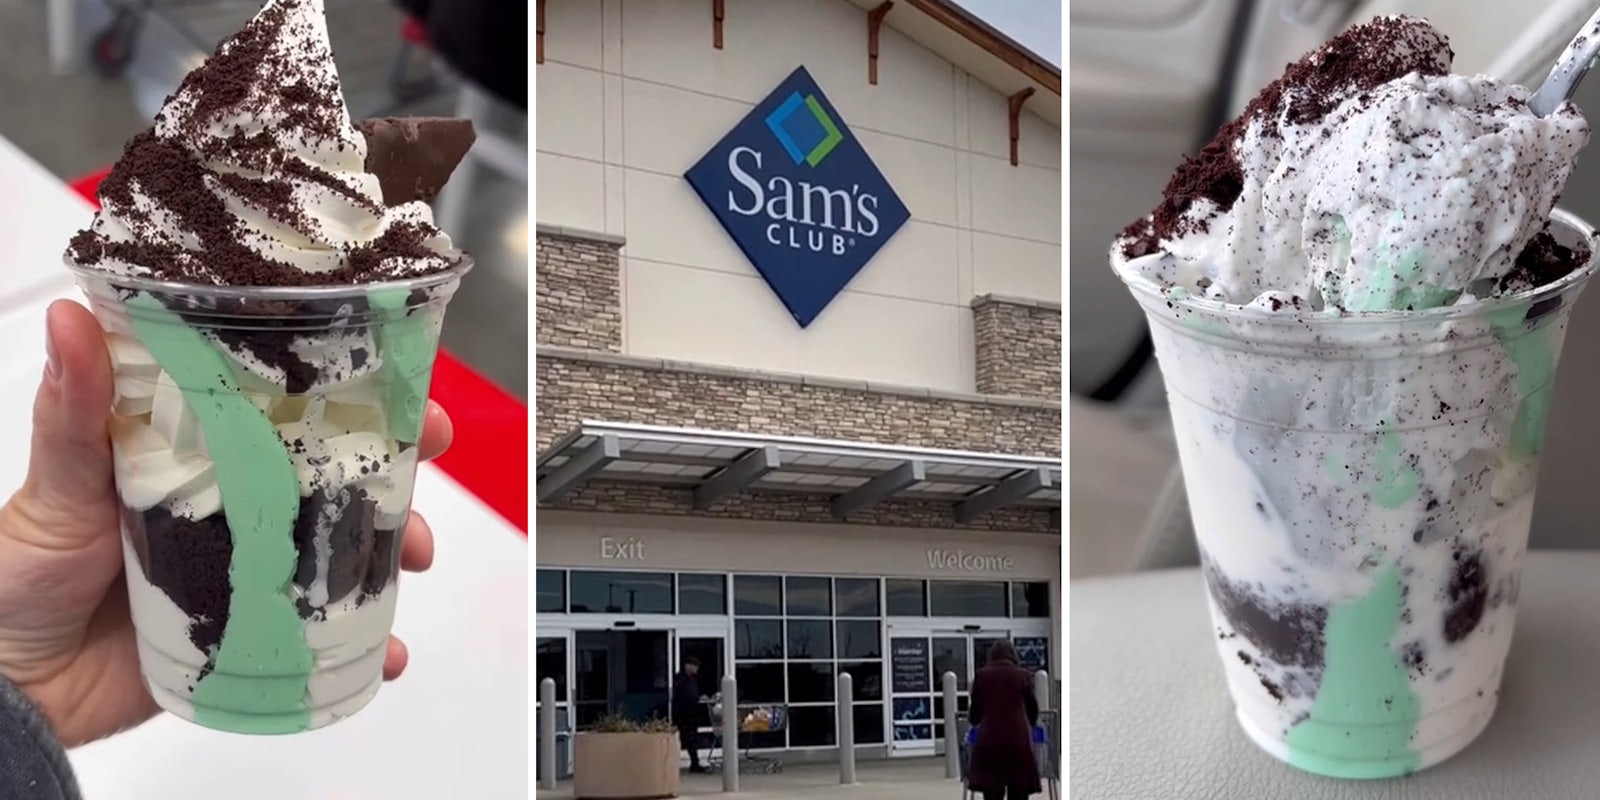 Sam’s Club new mint brownie sundae is all the rage this winter